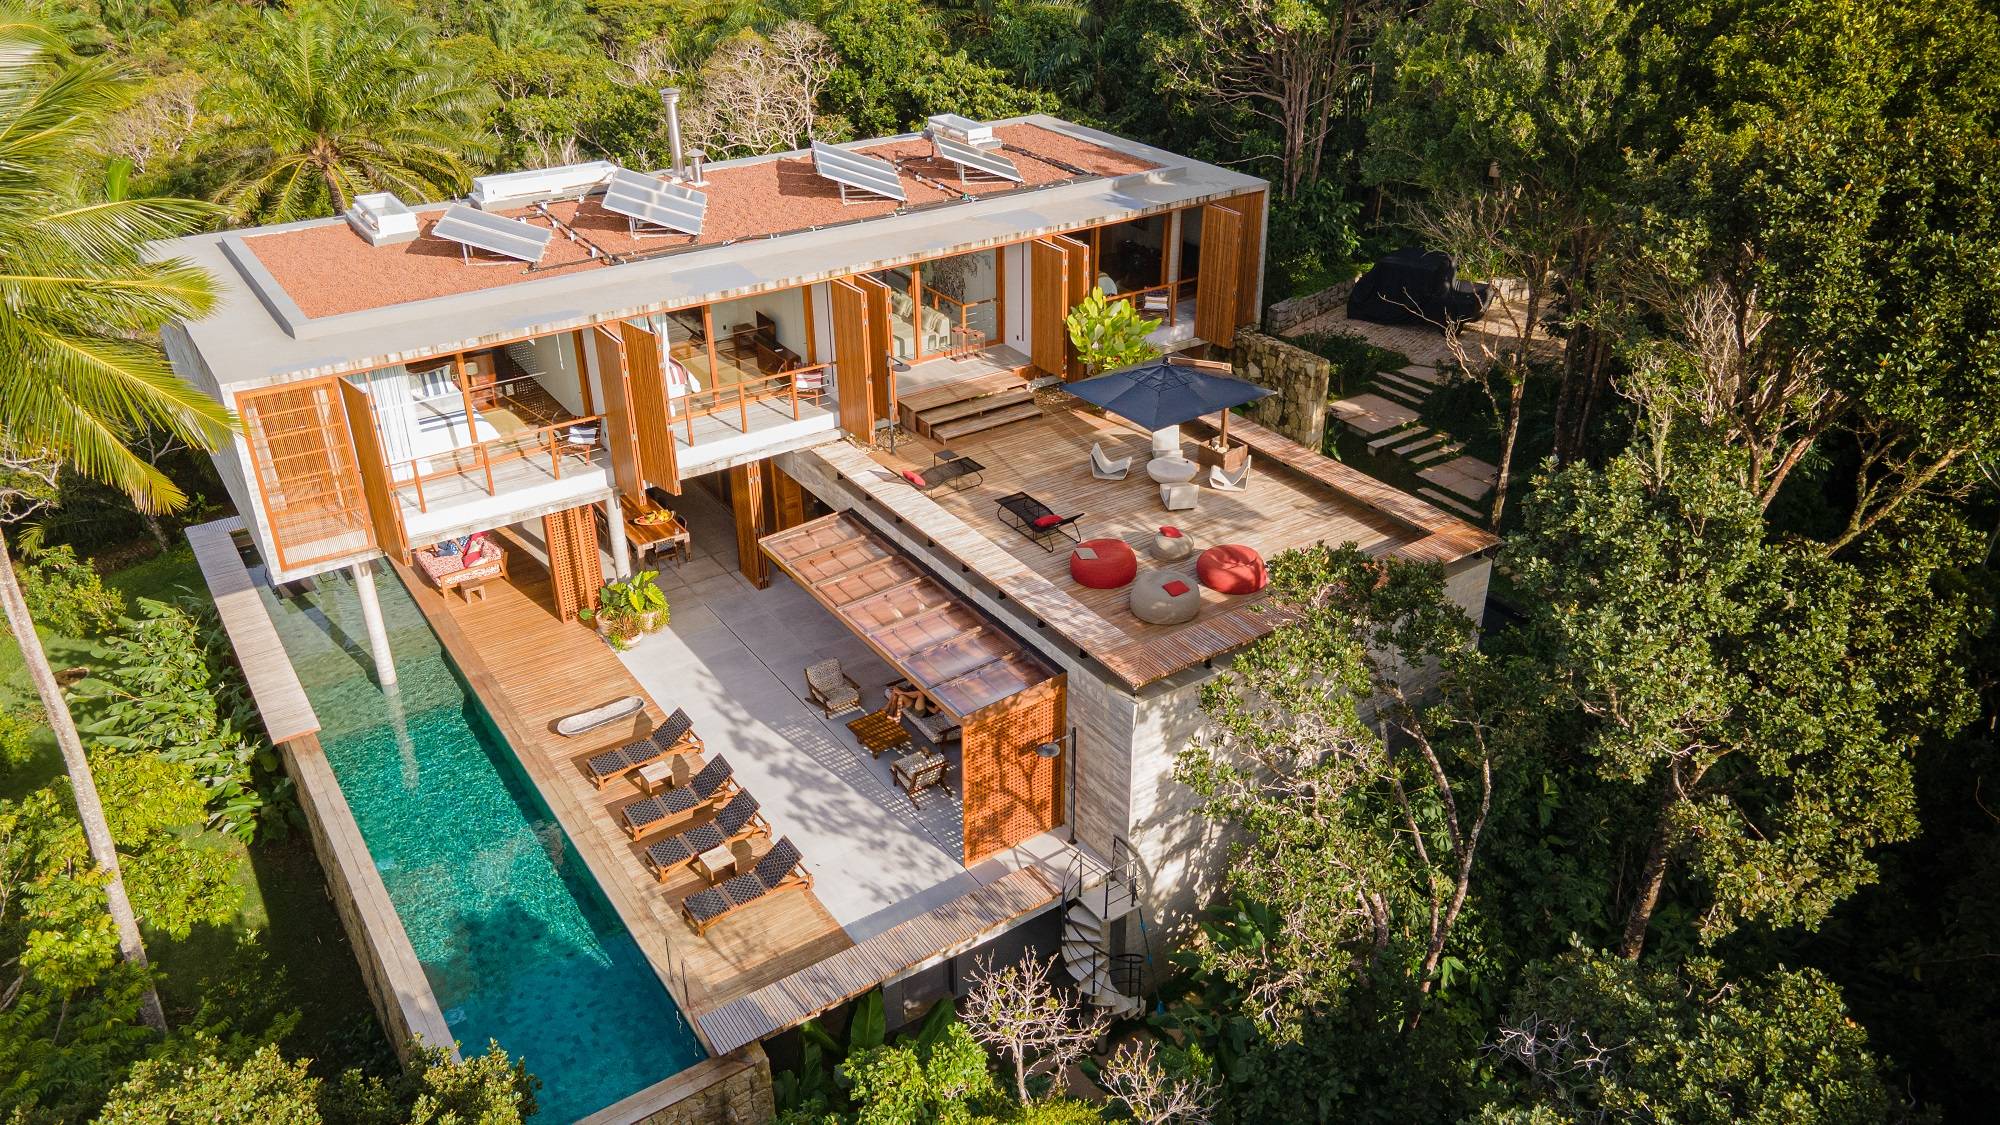 Introducing a 4-Bedroom Villa at Condominium Barracuda Hotel & Villas, Itacaré, Brazil. Seamlessly uniting Atlantic Forest's pristine charm with the expansive open sea, this villa epitomizes a rare fusion of nature and luxury.